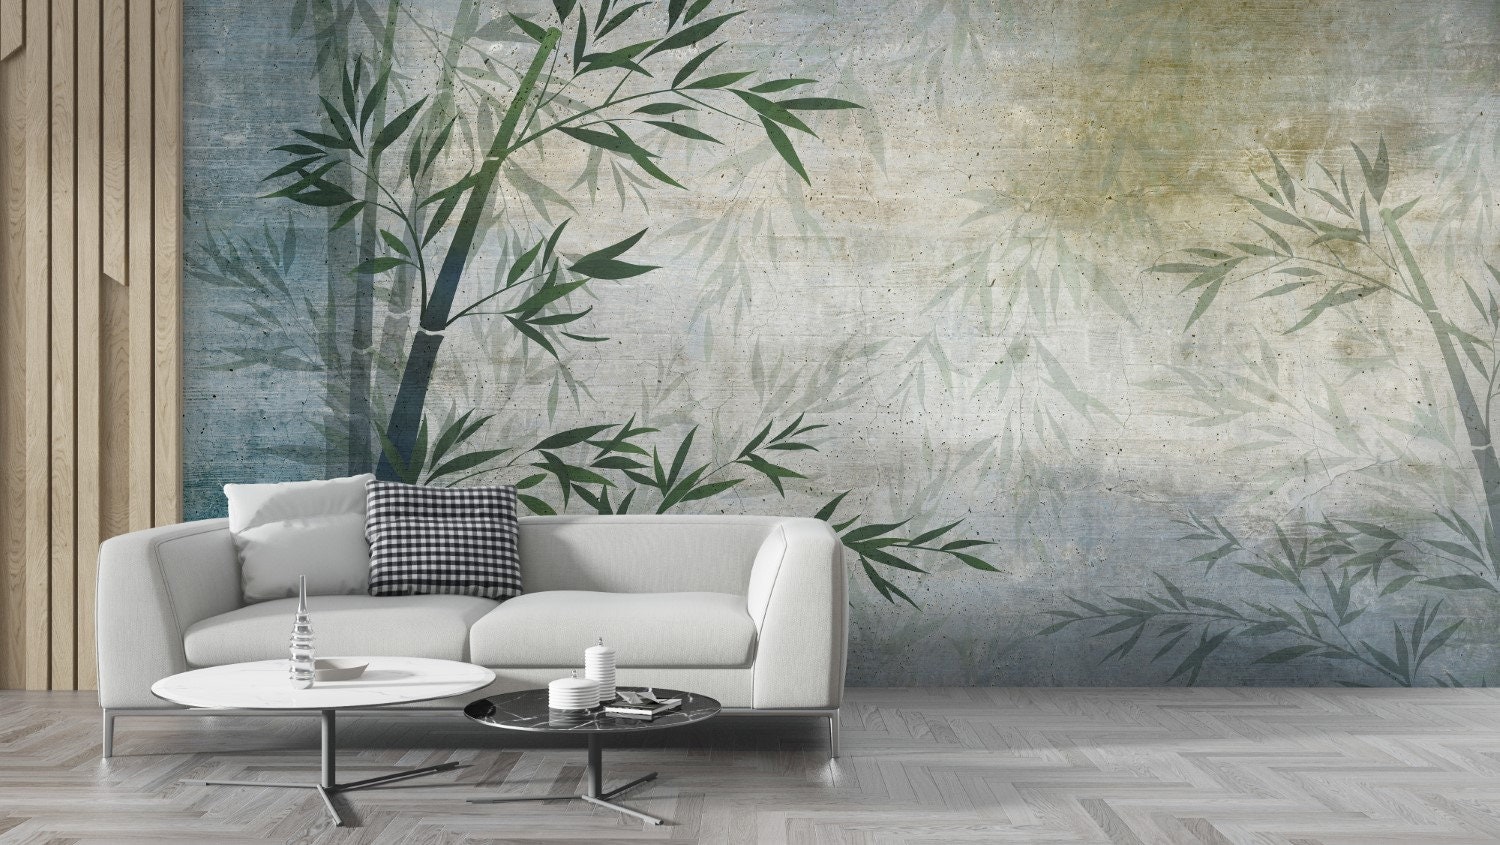 Tropical Bamboo Trees and Leaves Concrete Texture Wallpaper | Etsy